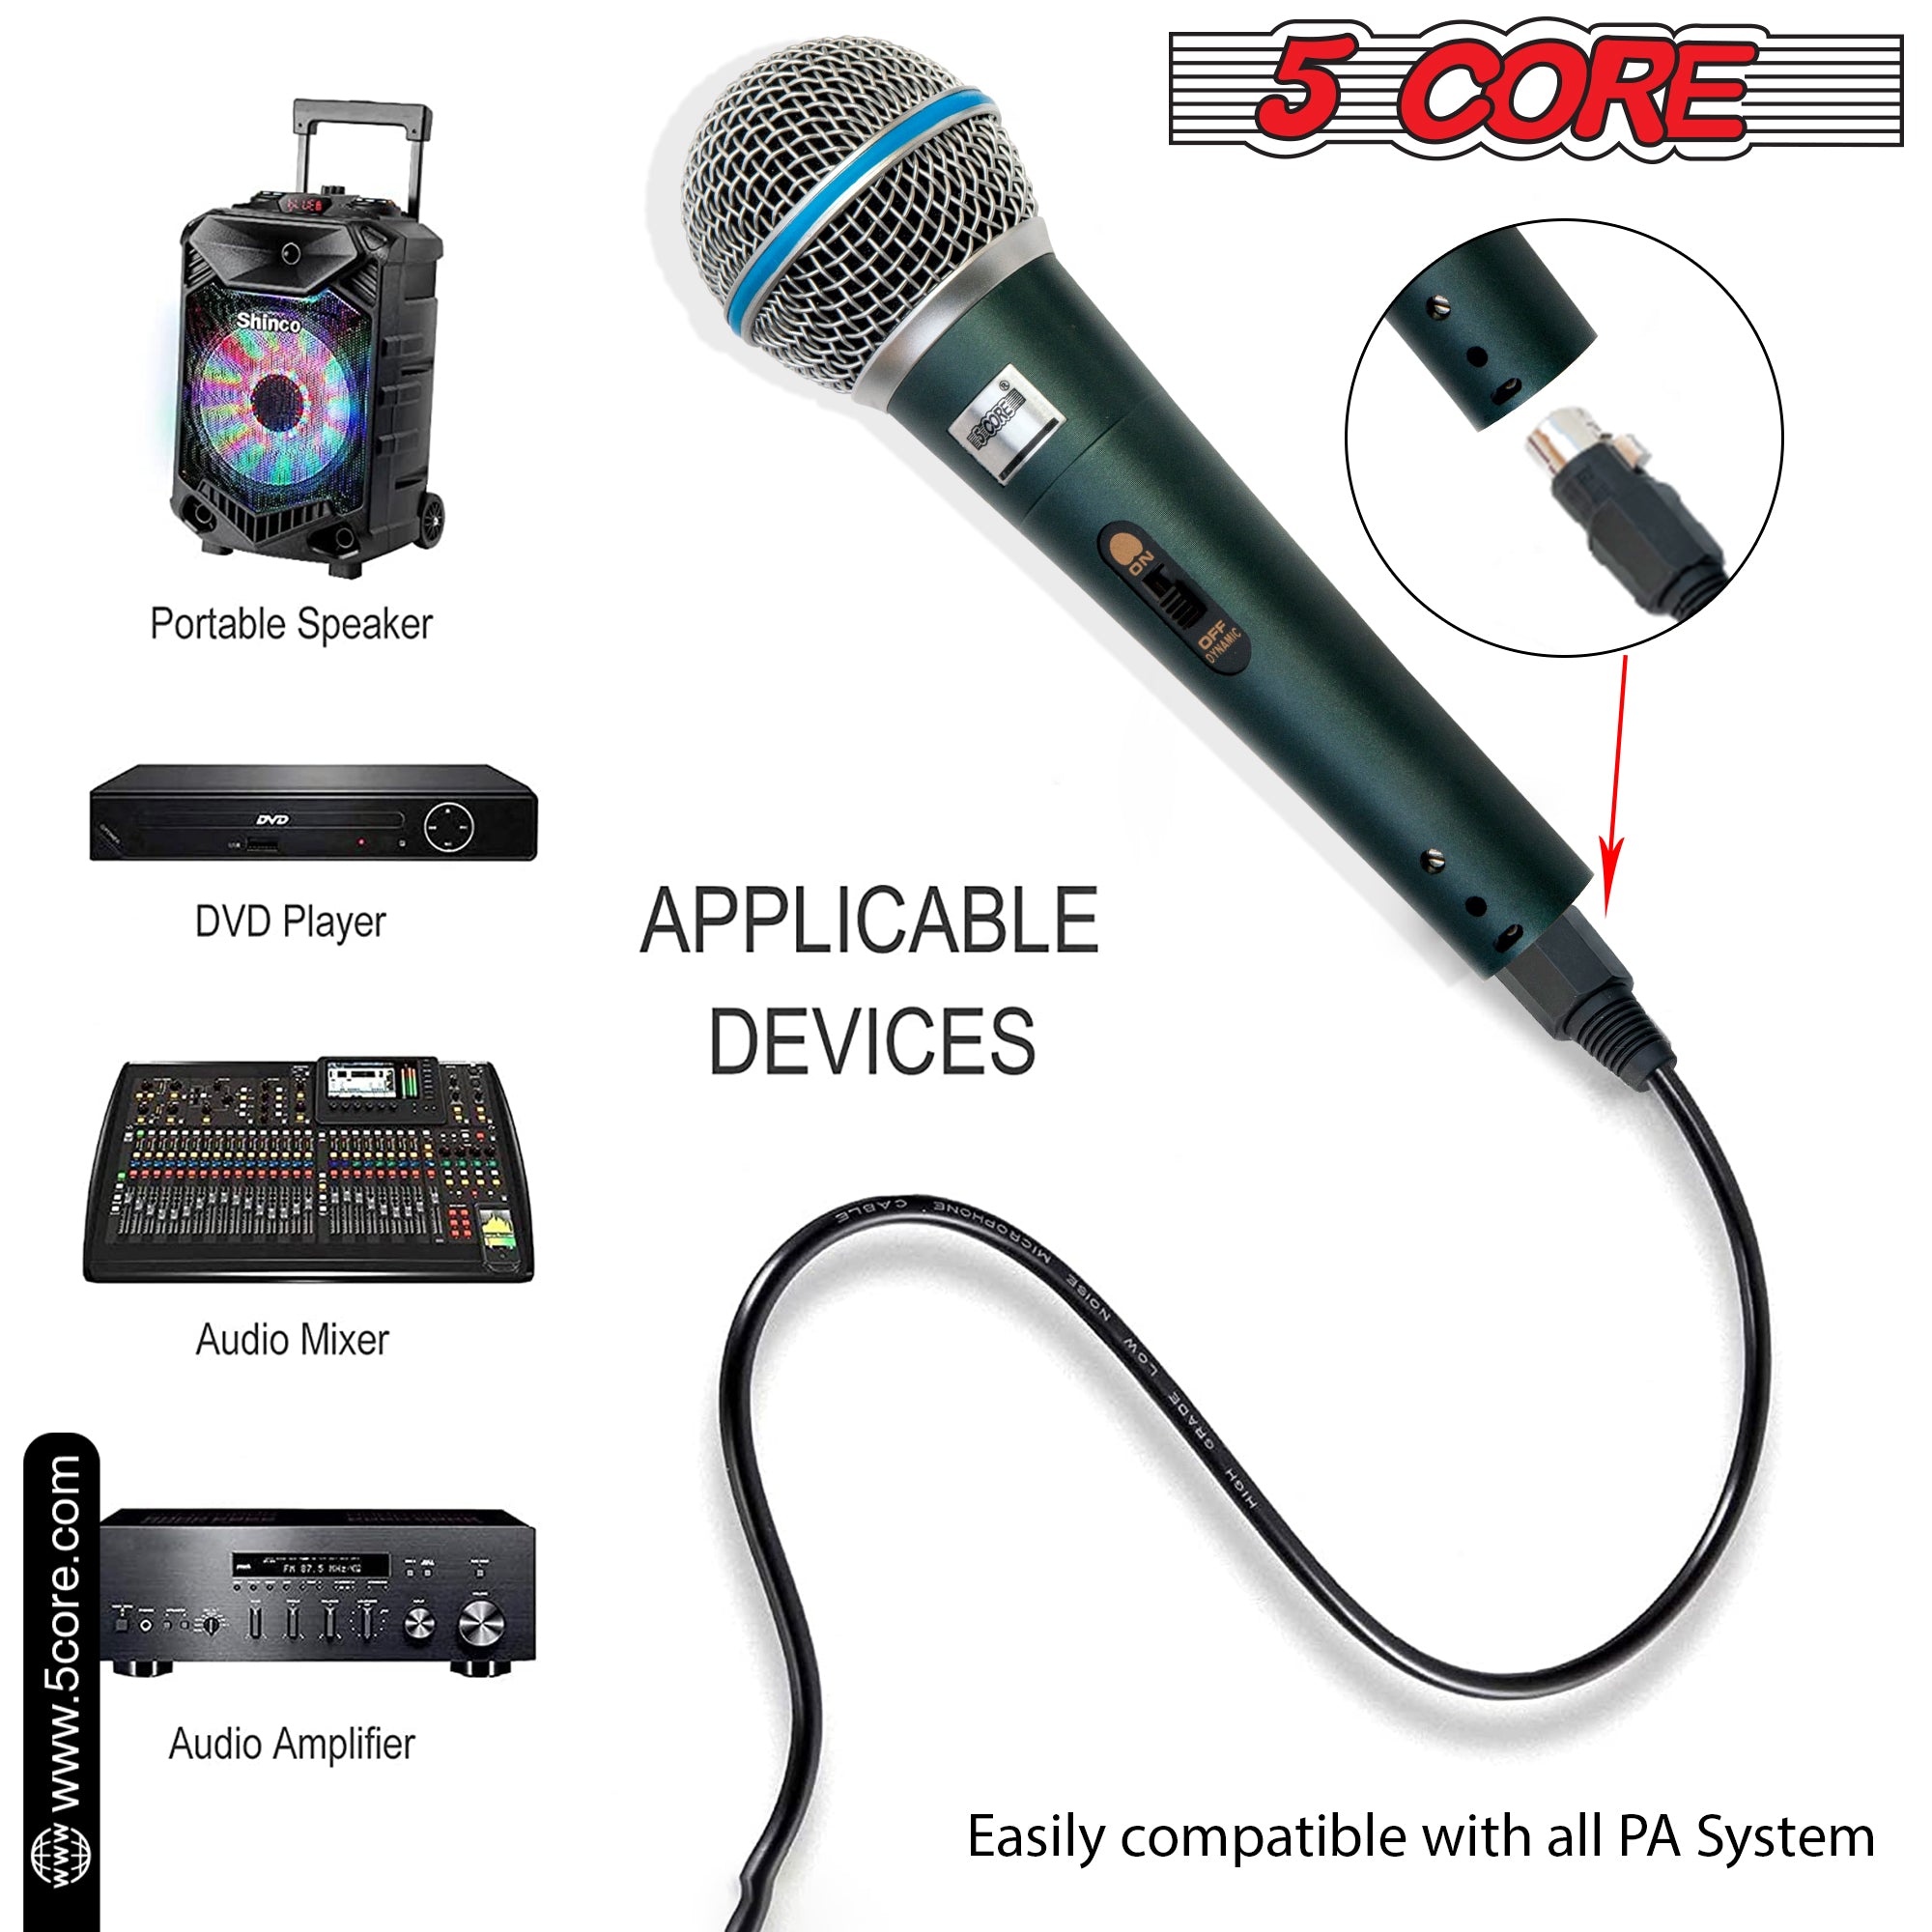 easily compatible with all PA system